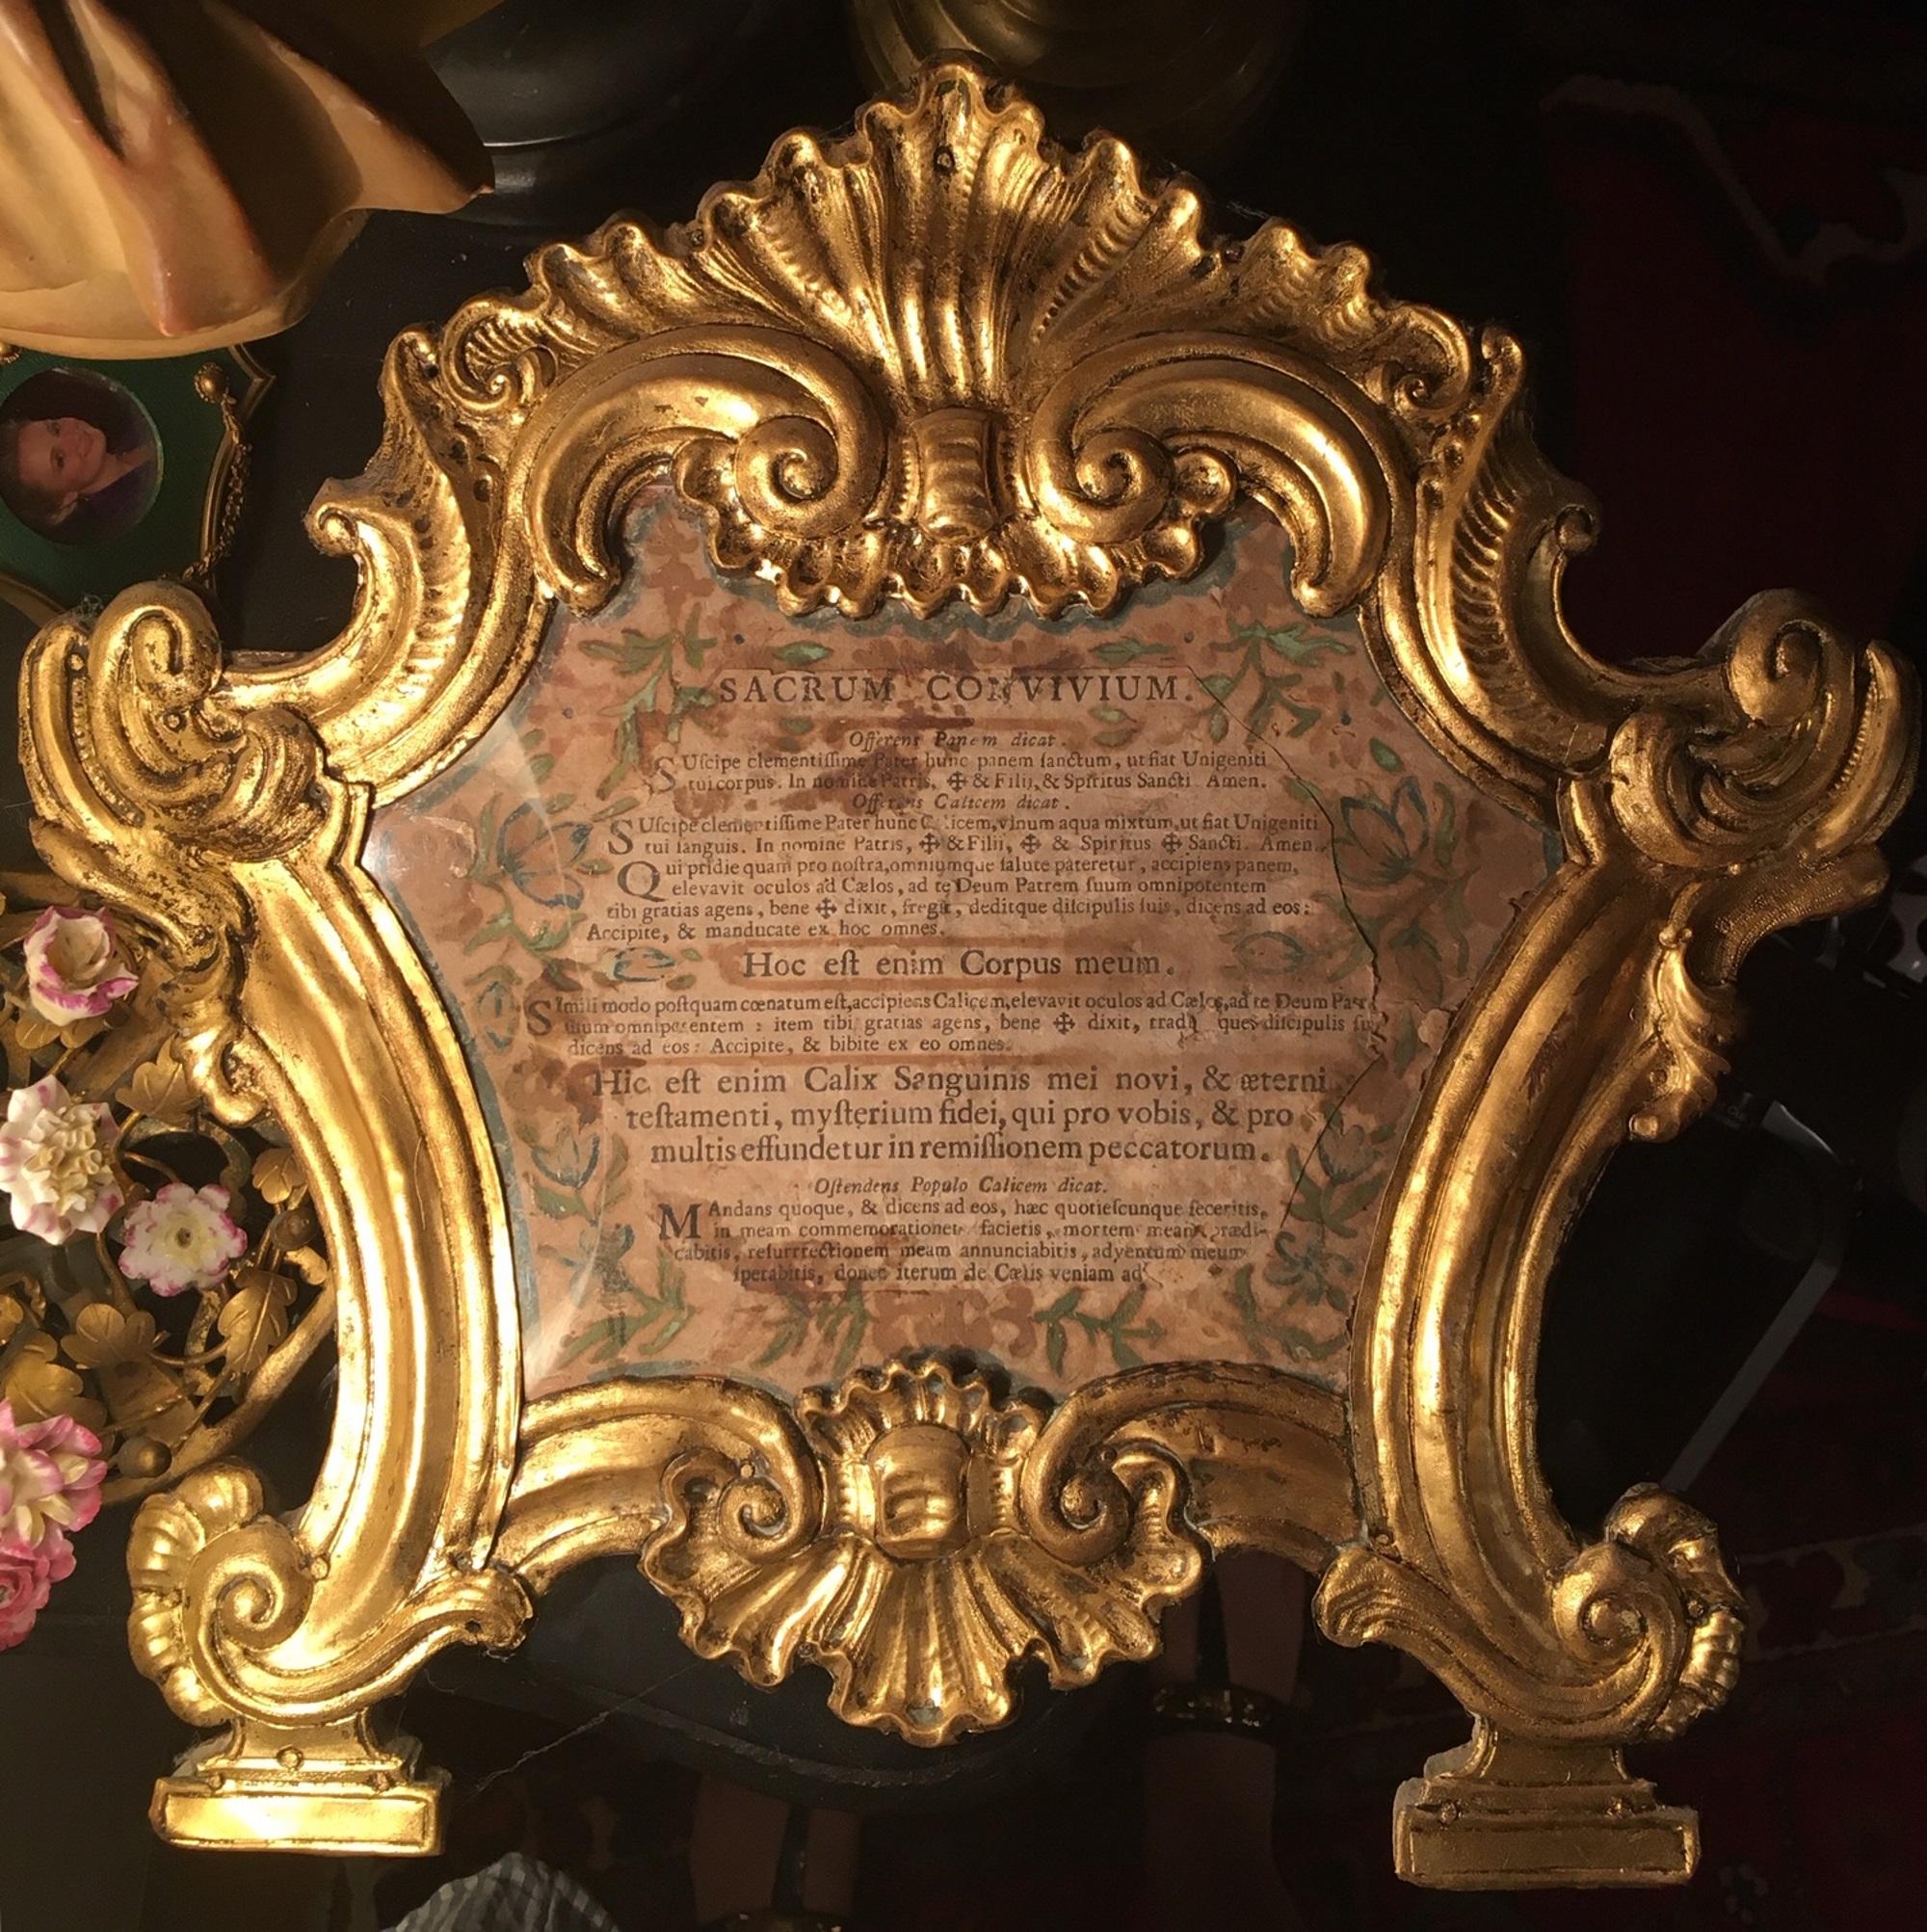 This original 18th century frame is gilded over copper. It is elaborately embossed and chiseled. The cartouche is surrounded by rocaille and volute motifs. The Carta is mounted on a wood backing and rests on two linear bases. It is very rare to find